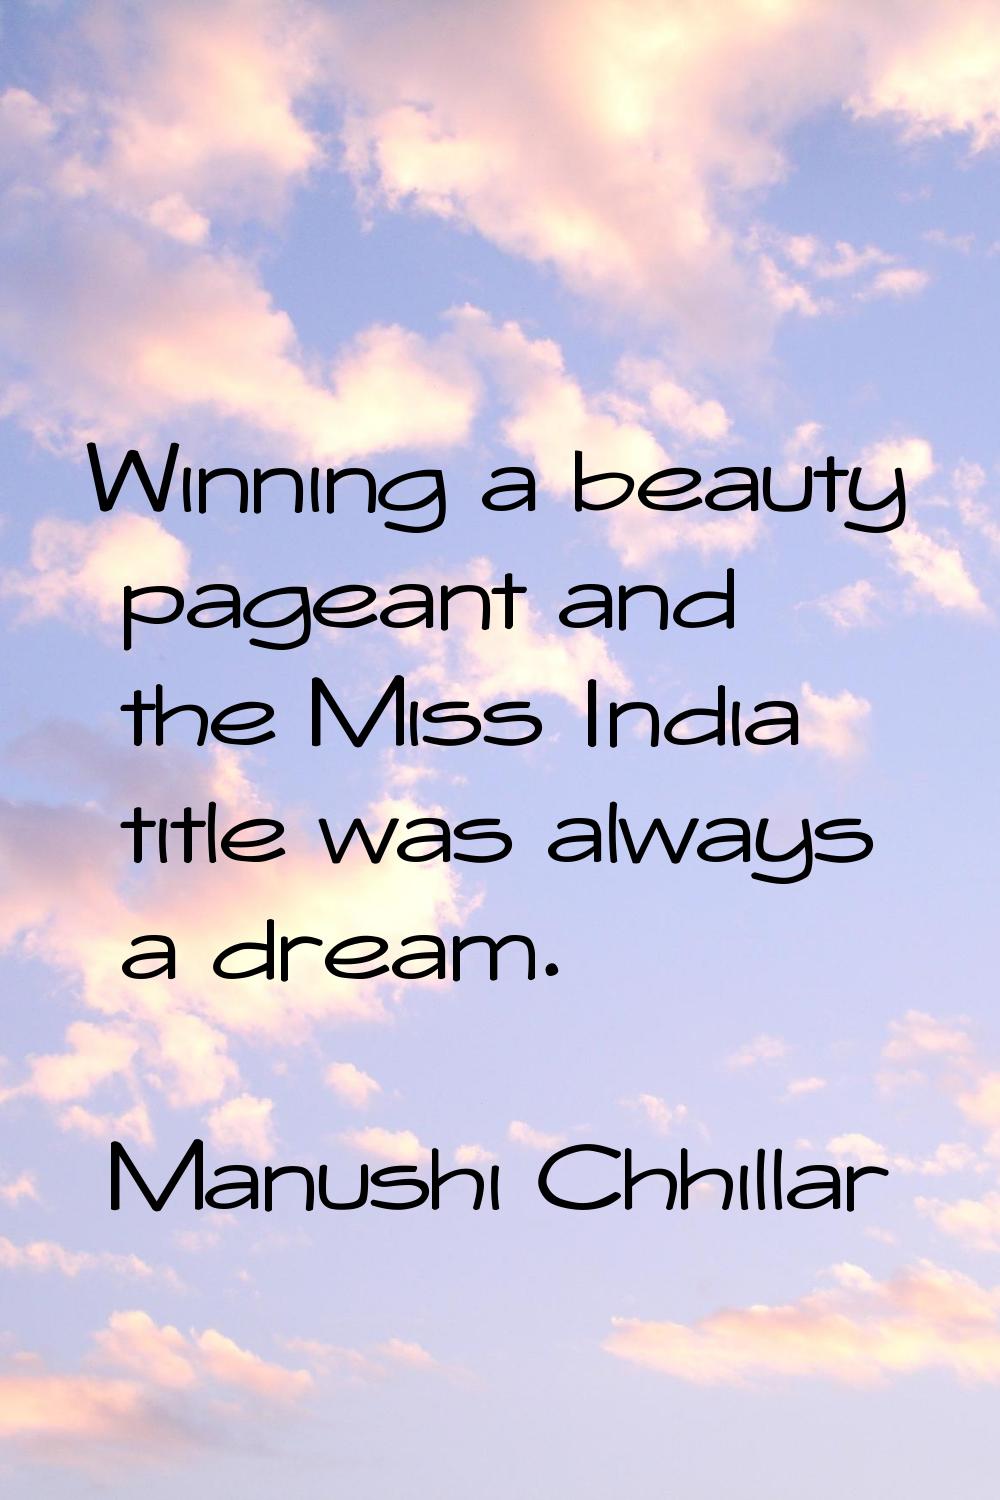 Winning a beauty pageant and the Miss India title was always a dream.